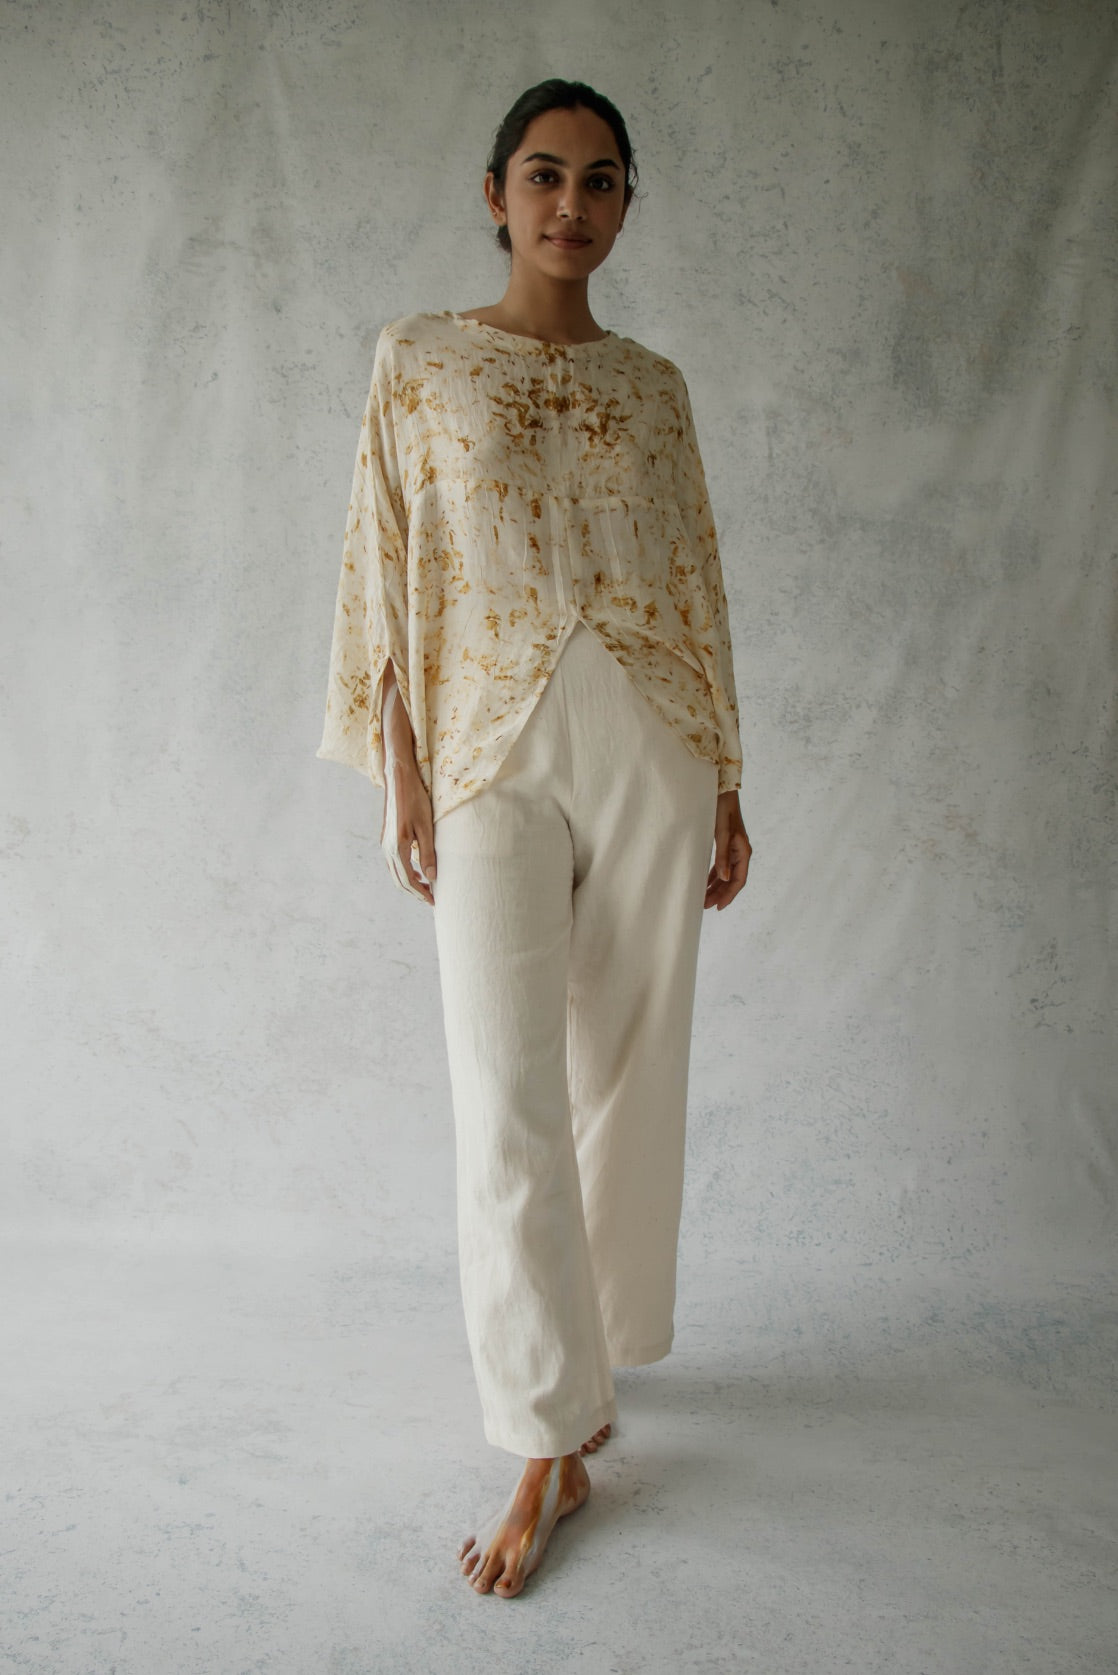 GOLDEN GLORY - Iconic Side Cowl Top